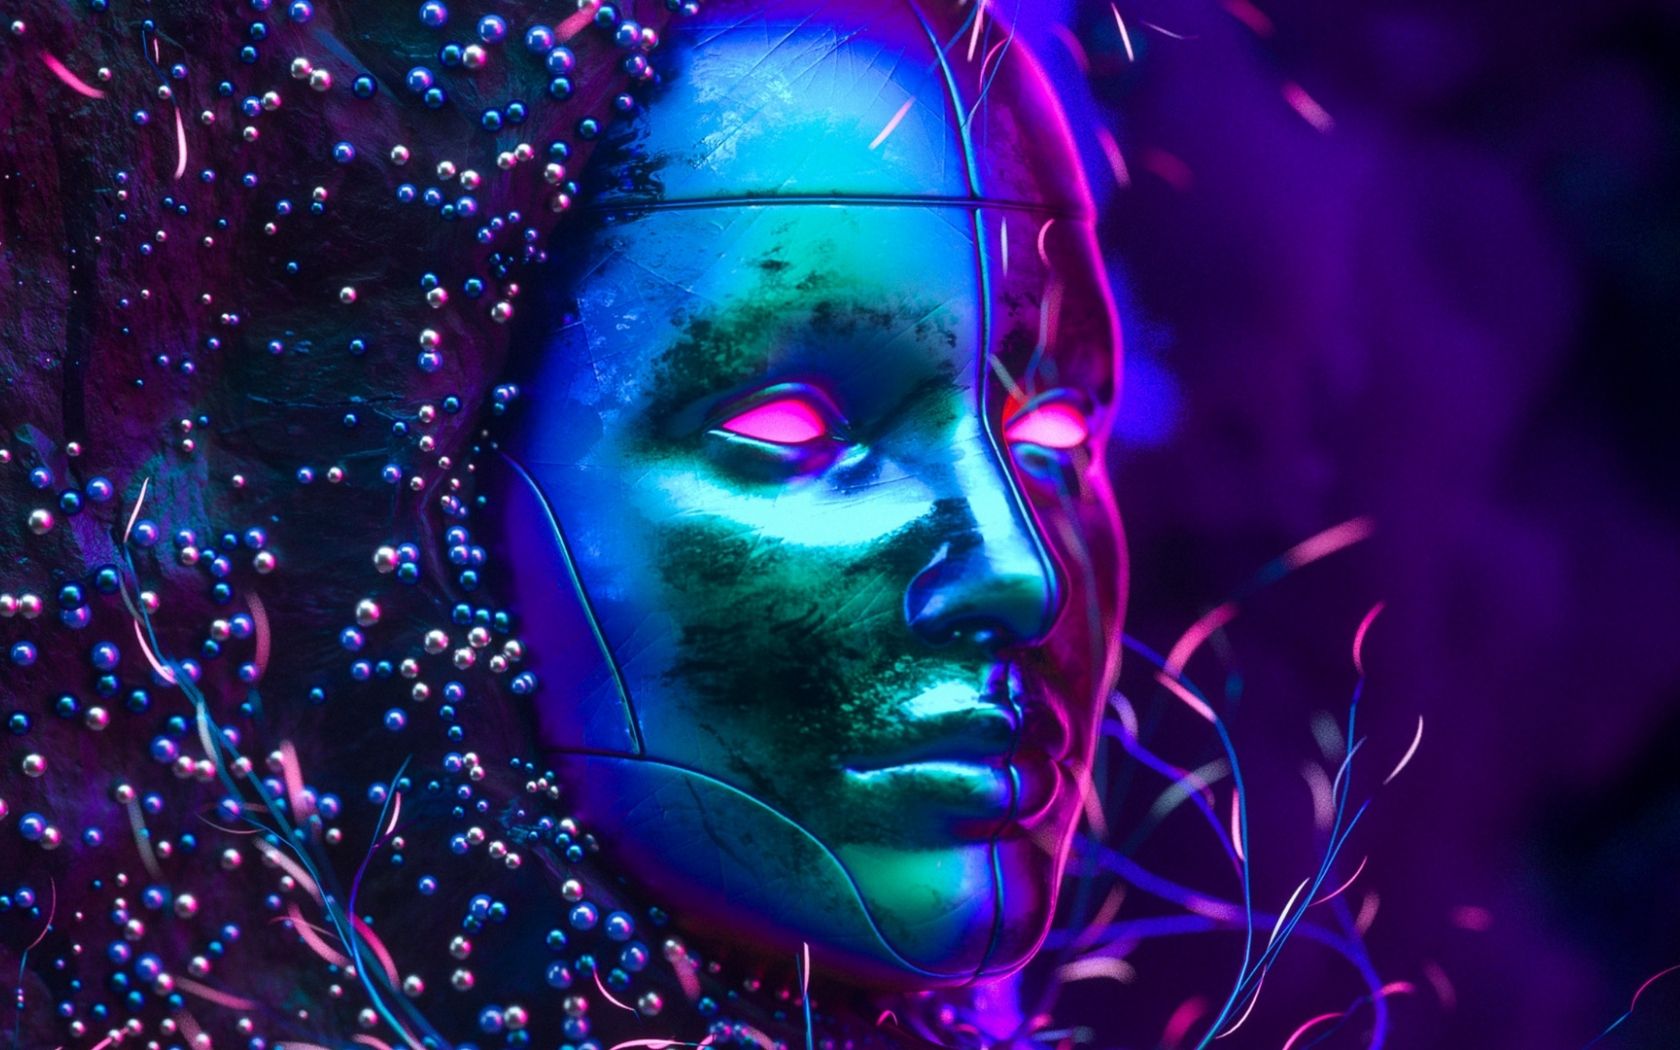 Free download Download wallpapers 1920x1080 mask neon glitter art.